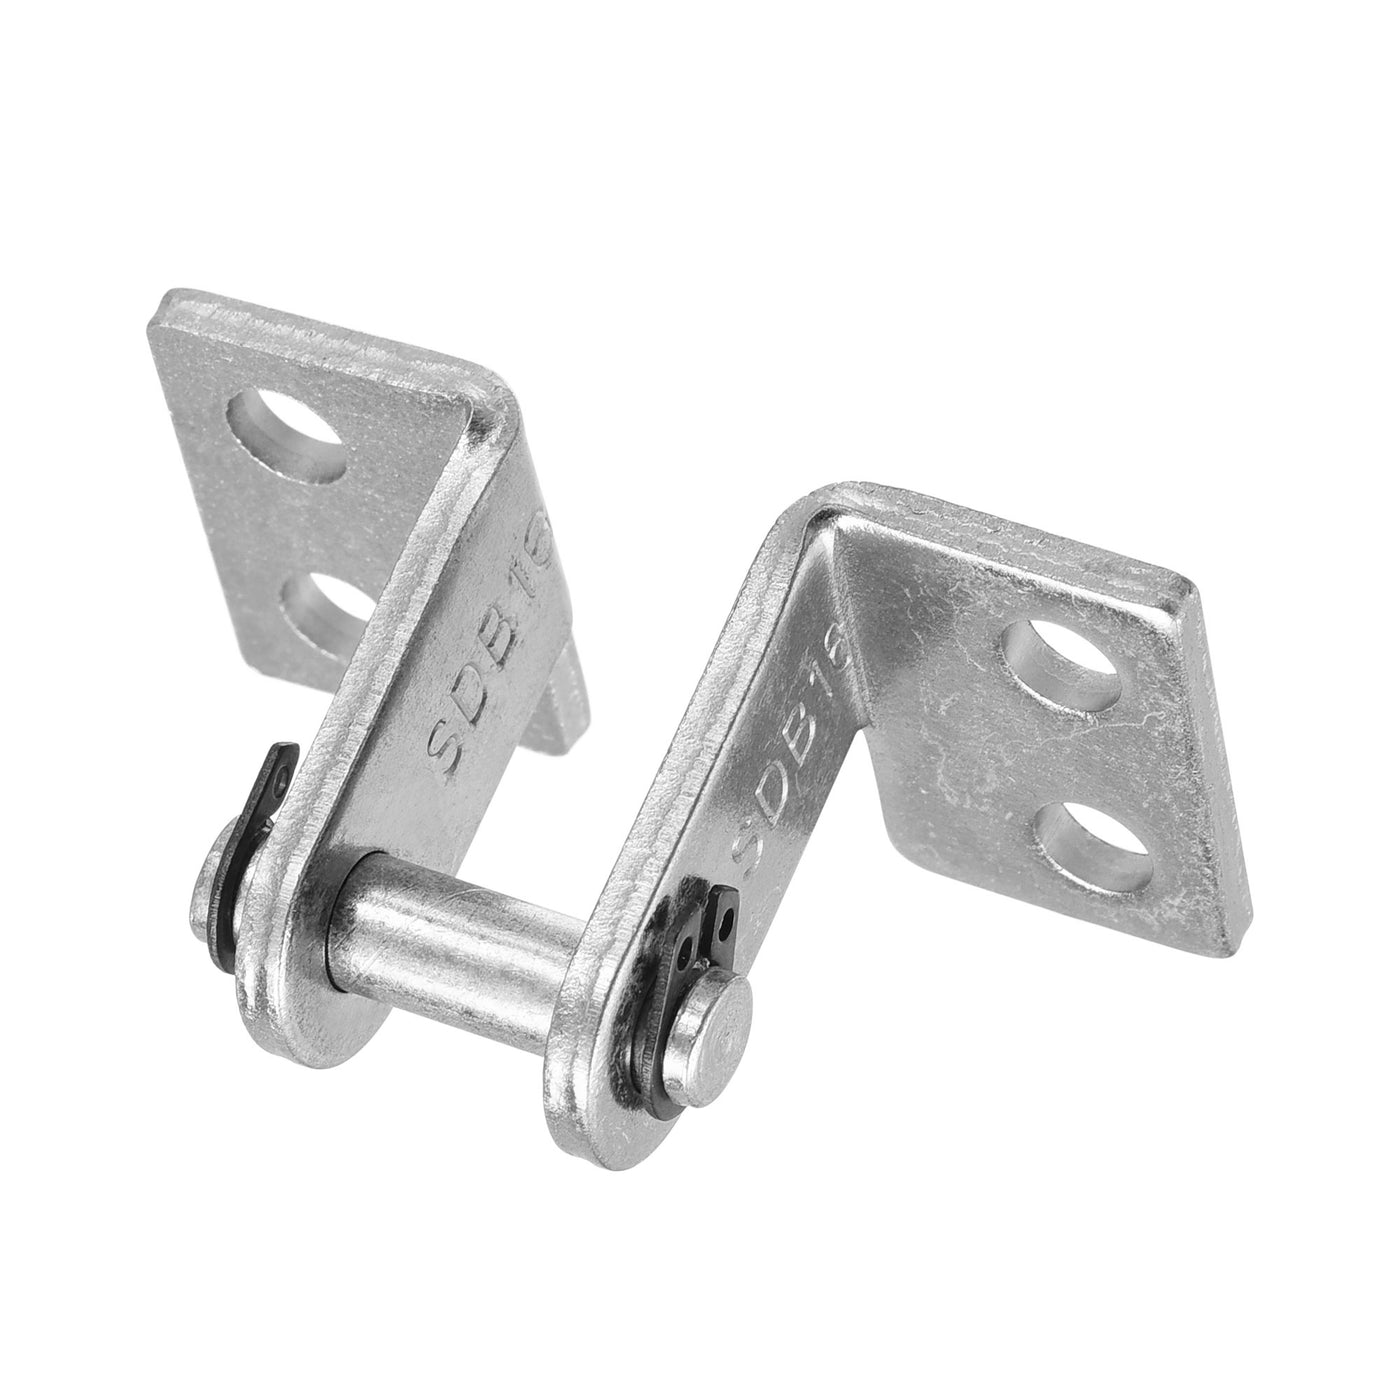 uxcell Uxcell Air Cylinder Rod Clevis Mounting Bracket 4 Bolt Holes MA/MAL Pneumatic Parts for 16mm Cylinder Bore, 2pcs